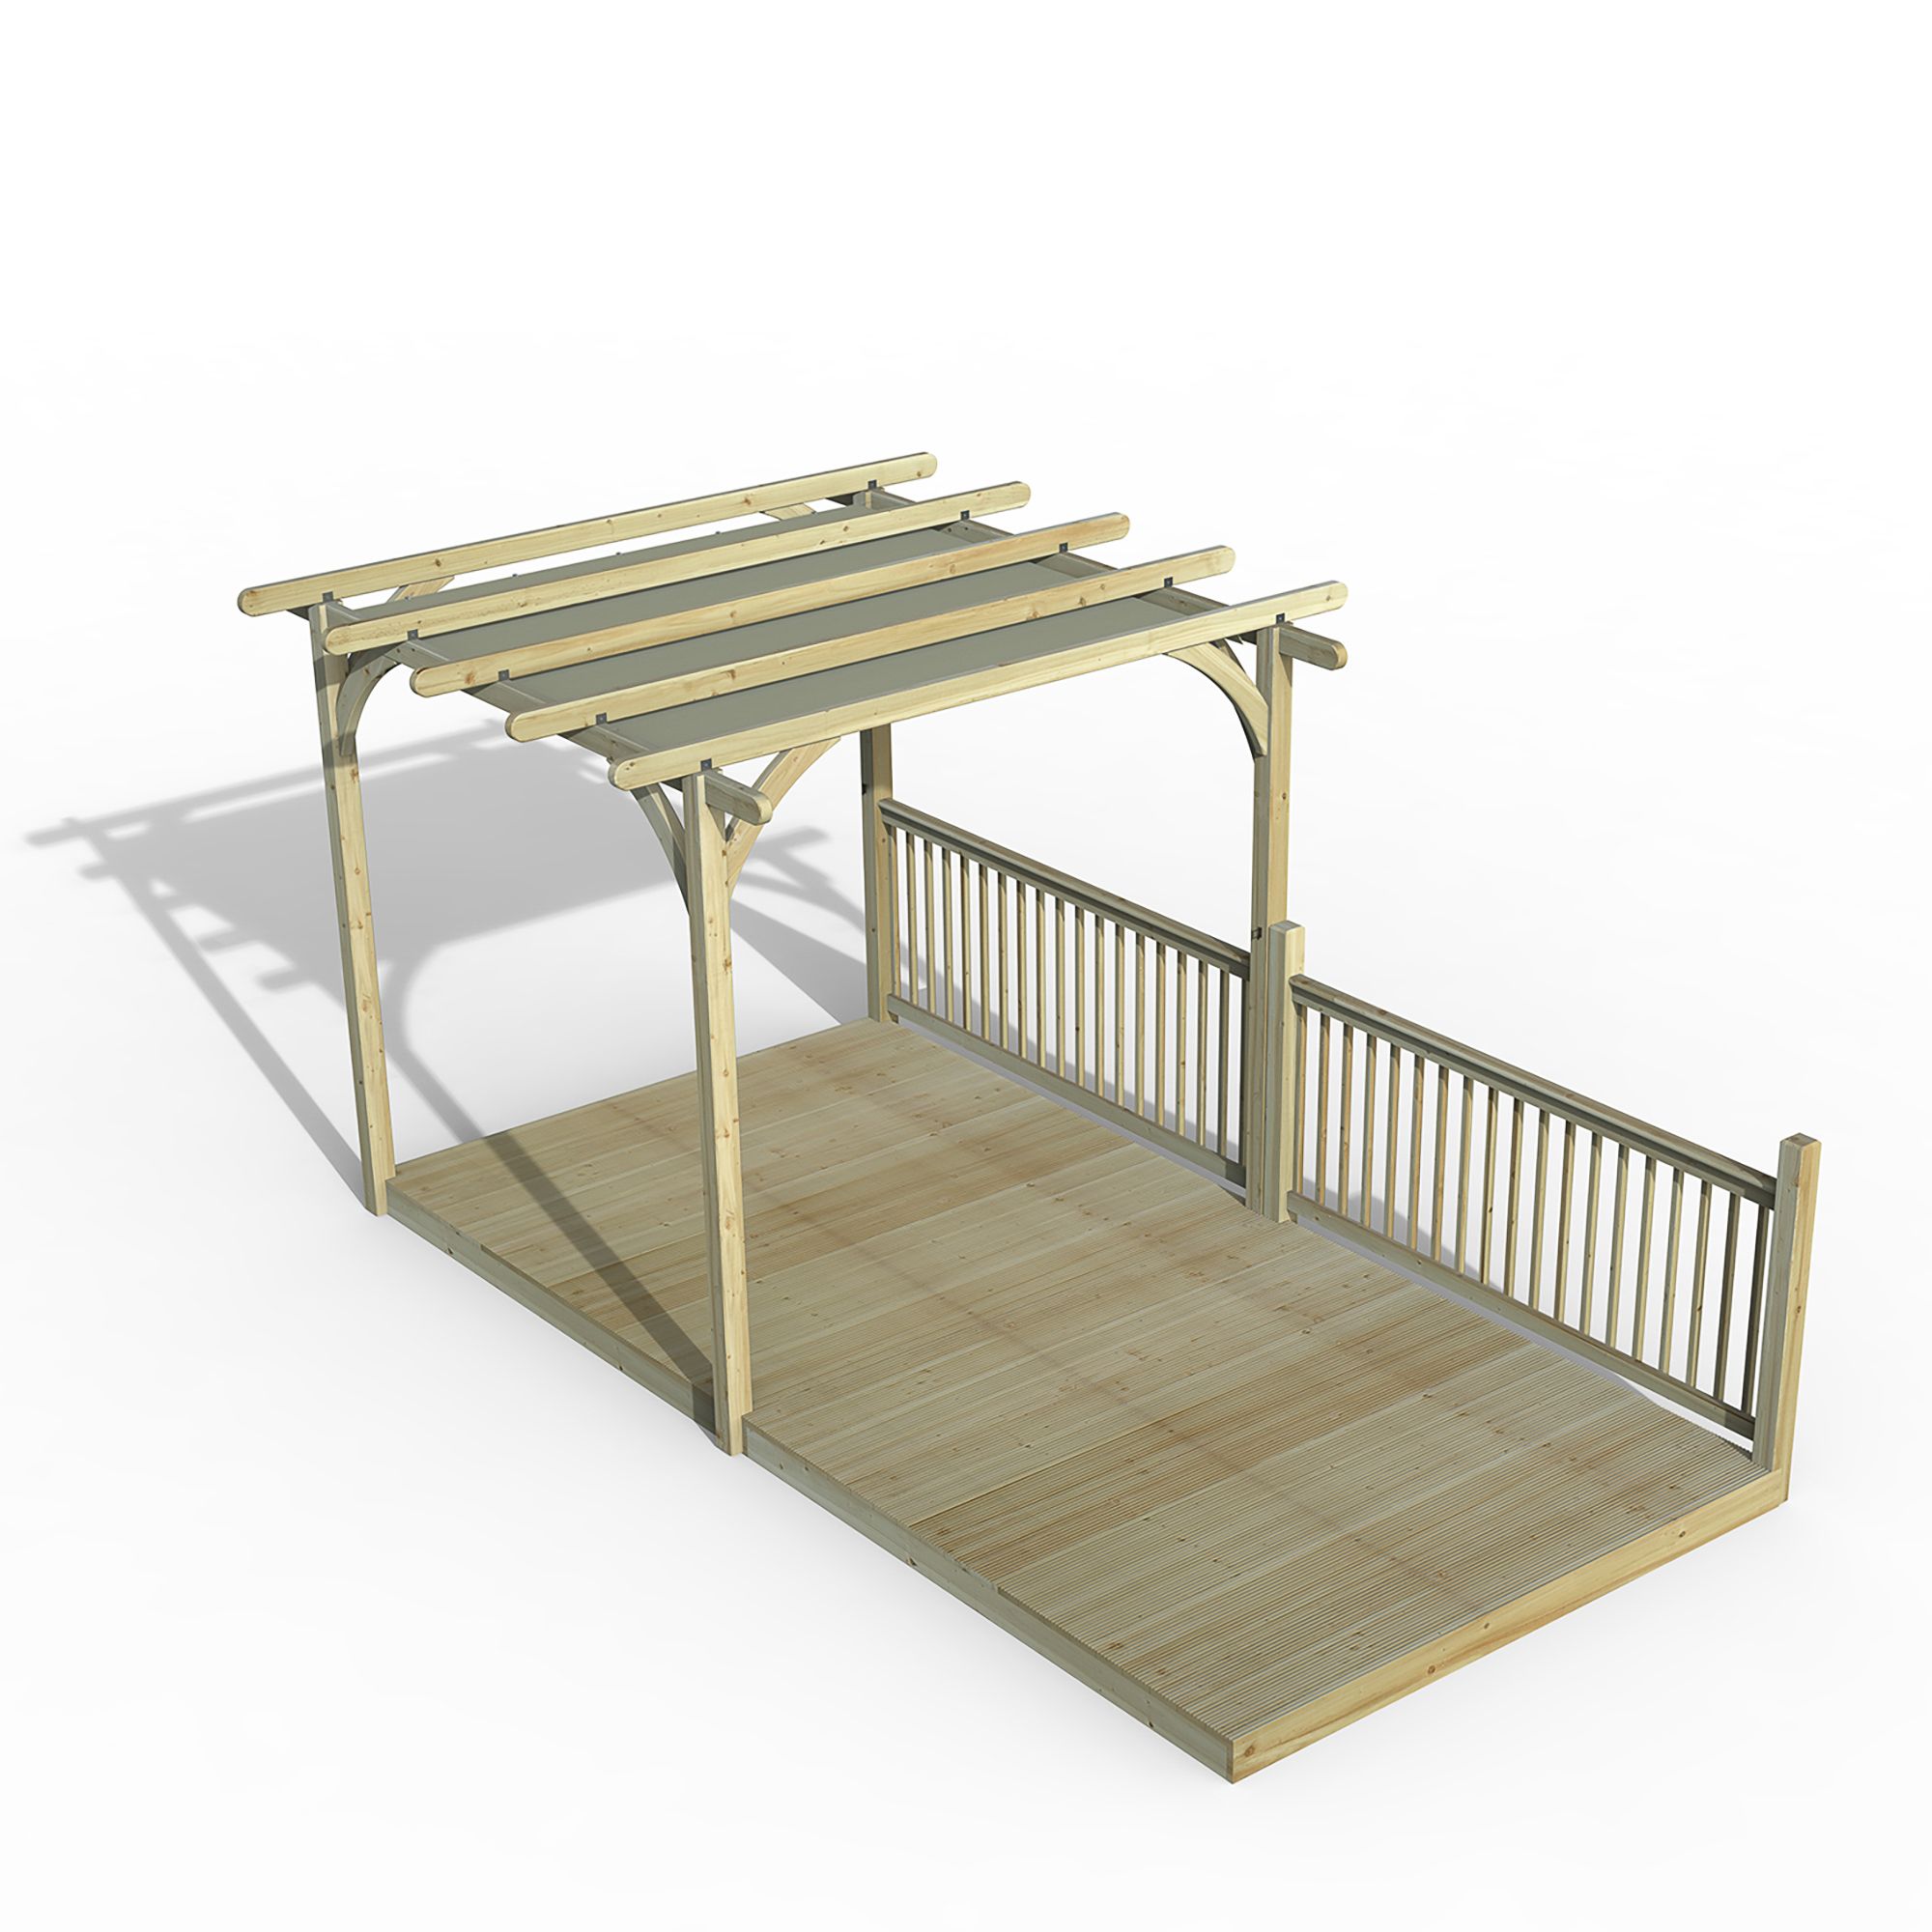 Forest Garden Grey Pergola & Decking Kit, X4 Post X2 Balustrade (H) 2.5M X (W) 5.2M - Canopy Included